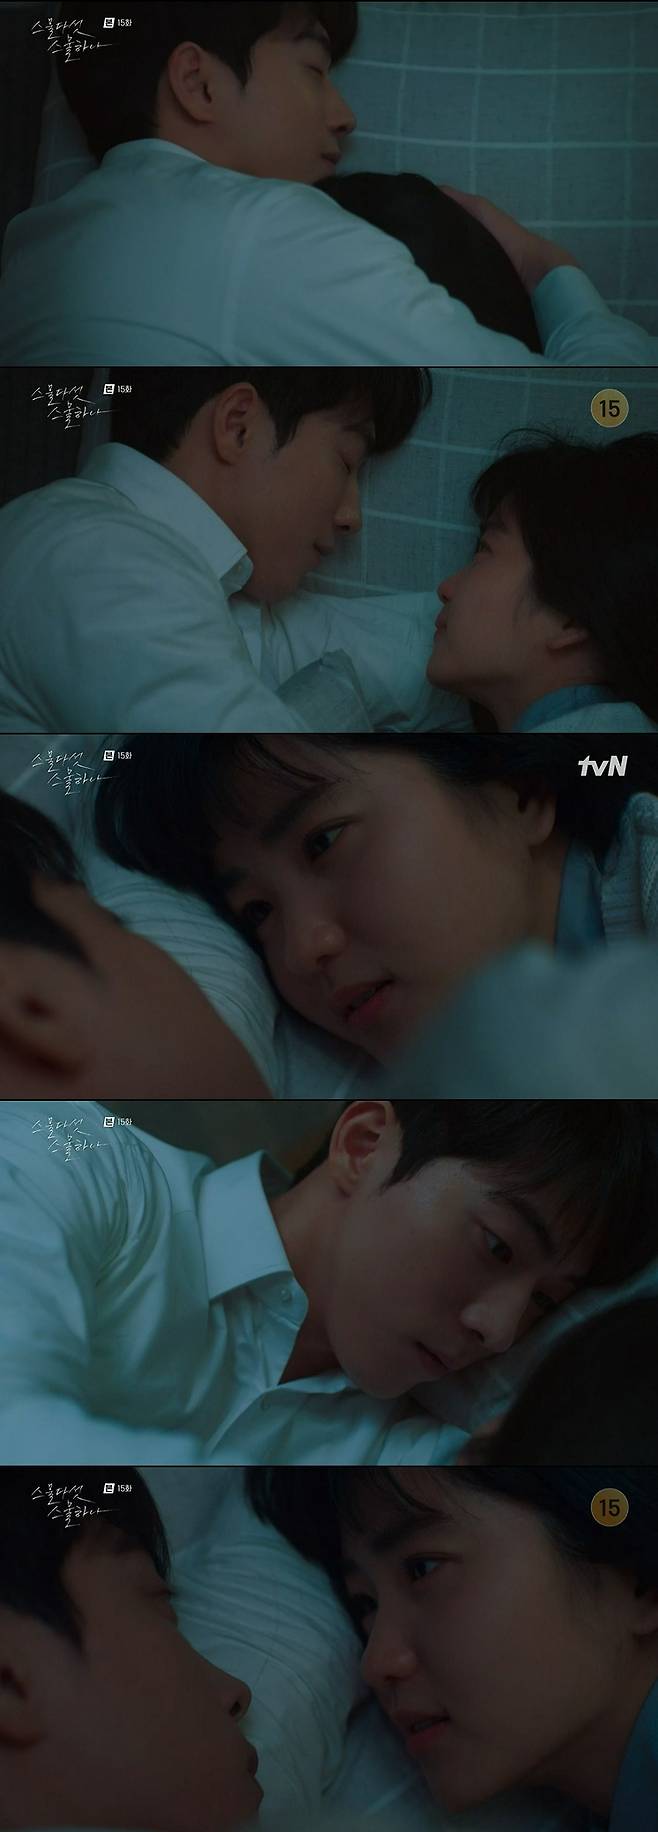 Seoul=) = Twenty five twinty one Nam Ju-hyuk and Kim Tae-ri will be separated as such.In TVN Twenty Five Twinty Hana (played by Kwon Do-eun, directed by Jung Ji-hyun), which was broadcast on the afternoon of the 2nd, the figure of Na Hee-do (Kim Tae-ri), who is getting farther away from him after Baek Lee Jin (Nam Joo-hyuk) was drawn to New York City for the September 11 terrorist coverage, was drawn.On this day, Na Hee-do found Lee Jin, who was suffering after spending his high Yu Rim.Lee Jin thought that Yu Rim was being cursed as a traitor in Korea because of himself, and in a tunnel with a graffiti on the name of Yu Rim, I made Yu Rim like this, Yu Rim made it and was congratulated by people.Na Hee-do said, Thats your job, I fencing and you admit to covering, and there is not much in the world that you can do at will.He then erased the graffiti with Lee Jin and said, Lets erase it together, I can do this at will, I was sorry to make it worse that day, I was angry, I did not mean it.I will give you advice as a GFriend, he said. I will share all of yours, sadness, joy, happiness, frustration, so do not hide because it is hard.The two of them continued their sweet devotion. Lee Jin moved from the sports office to the news office.In the meantime, Na Hee-dos mother, Shin Jae-kyung (Seo Jae-hee), said, I completely lost my objectivity to Na Hee-do.Shin Jae-kyung said, Please stay good between you without any emotion, and acknowledged the relationship between the two people.A few moments later, Na Hee-do found a back Lee Jin reporting the scene of the accident, but he could not call his name.After the report, Lee Jin drank with his seniors to soothe the shock and sadness that he witnessed the accident.After receiving the contact of the senior, Na Hee-do visited the bar, and the two had a good time drinking soju together.Lets go the second, said Lee Jin, who brought Na Hee-do home, and laid down a drunken Na Hee-do, who told Na Hee-do, Life is precious, we live without regret.Na Hee-do said, Remember what you said in the past?I always lead you to a good place, you are the one who leads the world we live in to a better place, so do not be too hard. In Na Hee-dos words to cheer up, Lee Jin embraced Na Hee-do and expressed his full affection by saying, I love you, in all ways.Over time, Na Hee-do will face Ko Yu Rim, who played in Kyonggi as Russian national Yulia Goro in Kyonggi, Madrid, Spain.In the meantime, Yu Rim did not reply to Na Hee-dos mail.In addition, the Interview article of Yu Rim has become a hot topic because it contains comments that seem to have spoken negatively about Na Hee-do.The two Kyonggi were not easy: Na Hee-do won the gold medal after the close race, and as soon as Kyonggi was finished, the two hugged each other and wept.I know, I do not tell you, you have experienced what I have been through, Na Hee-do told Yu Rim, who was trying to say something. We only know how hard we were, and we were really happy.Lee Jin, who was watching Na Hee-dos gold medal report at Seoul, congratulated Jae-kyeong Seo and Jae-kyeong Seo said, You congratulate me and put such a GFriend.I want to be a person who is not ashamed of Heedo, said Lee Jin.Lee Jin, who had moved to the press office, continued his devotion to Na Hee-do even during a tight schedule, and they prepared for the trip to celebrate 600 days.The two men who bought a red bag, a couple item, at dawn, but the trip was canceled.However, Baek Lee Jin replied, Growth ... I do not want to call this emotion growth. Na Hee-do was saddened by monologue, saying, I can not reach my support anymore.Later, Na Hee-do heard from her mother, Jae-kyeong Seo, that Lee Jin had applied to New York City correspondents and was saddened to welcome the new year alone.